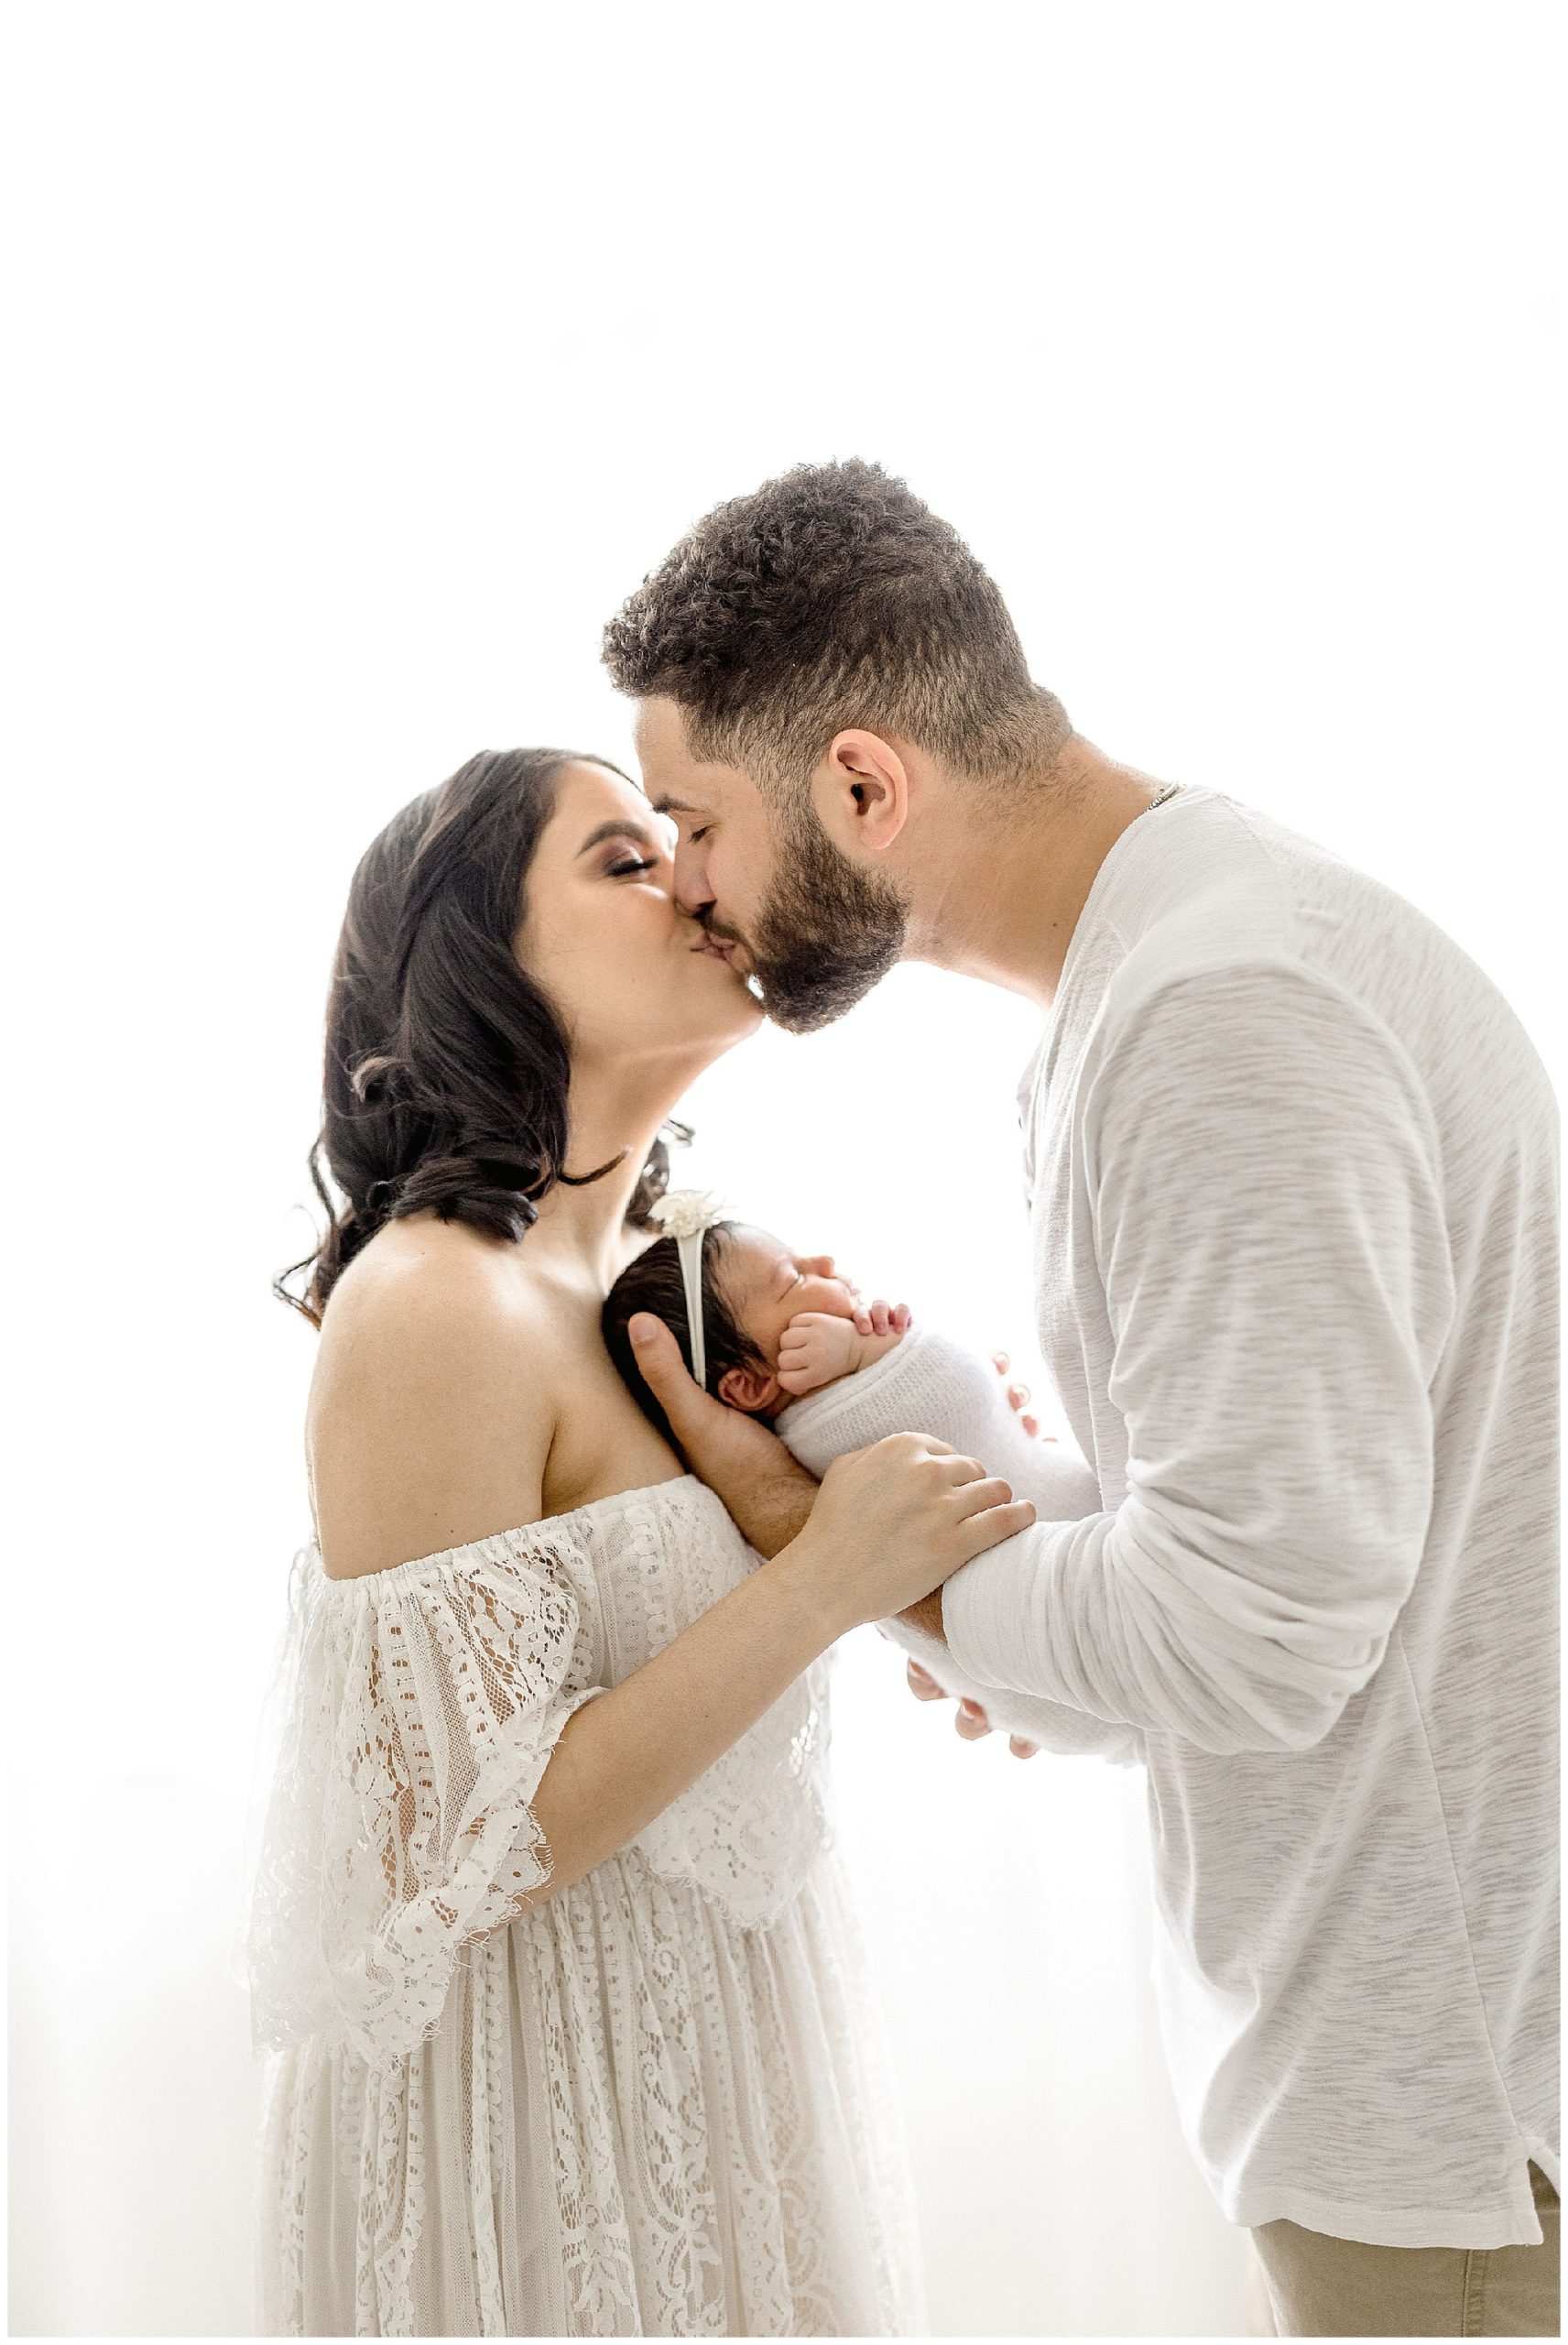 New parents kiss while holding their newborn. Photo by Ivanna Vidal Photography.